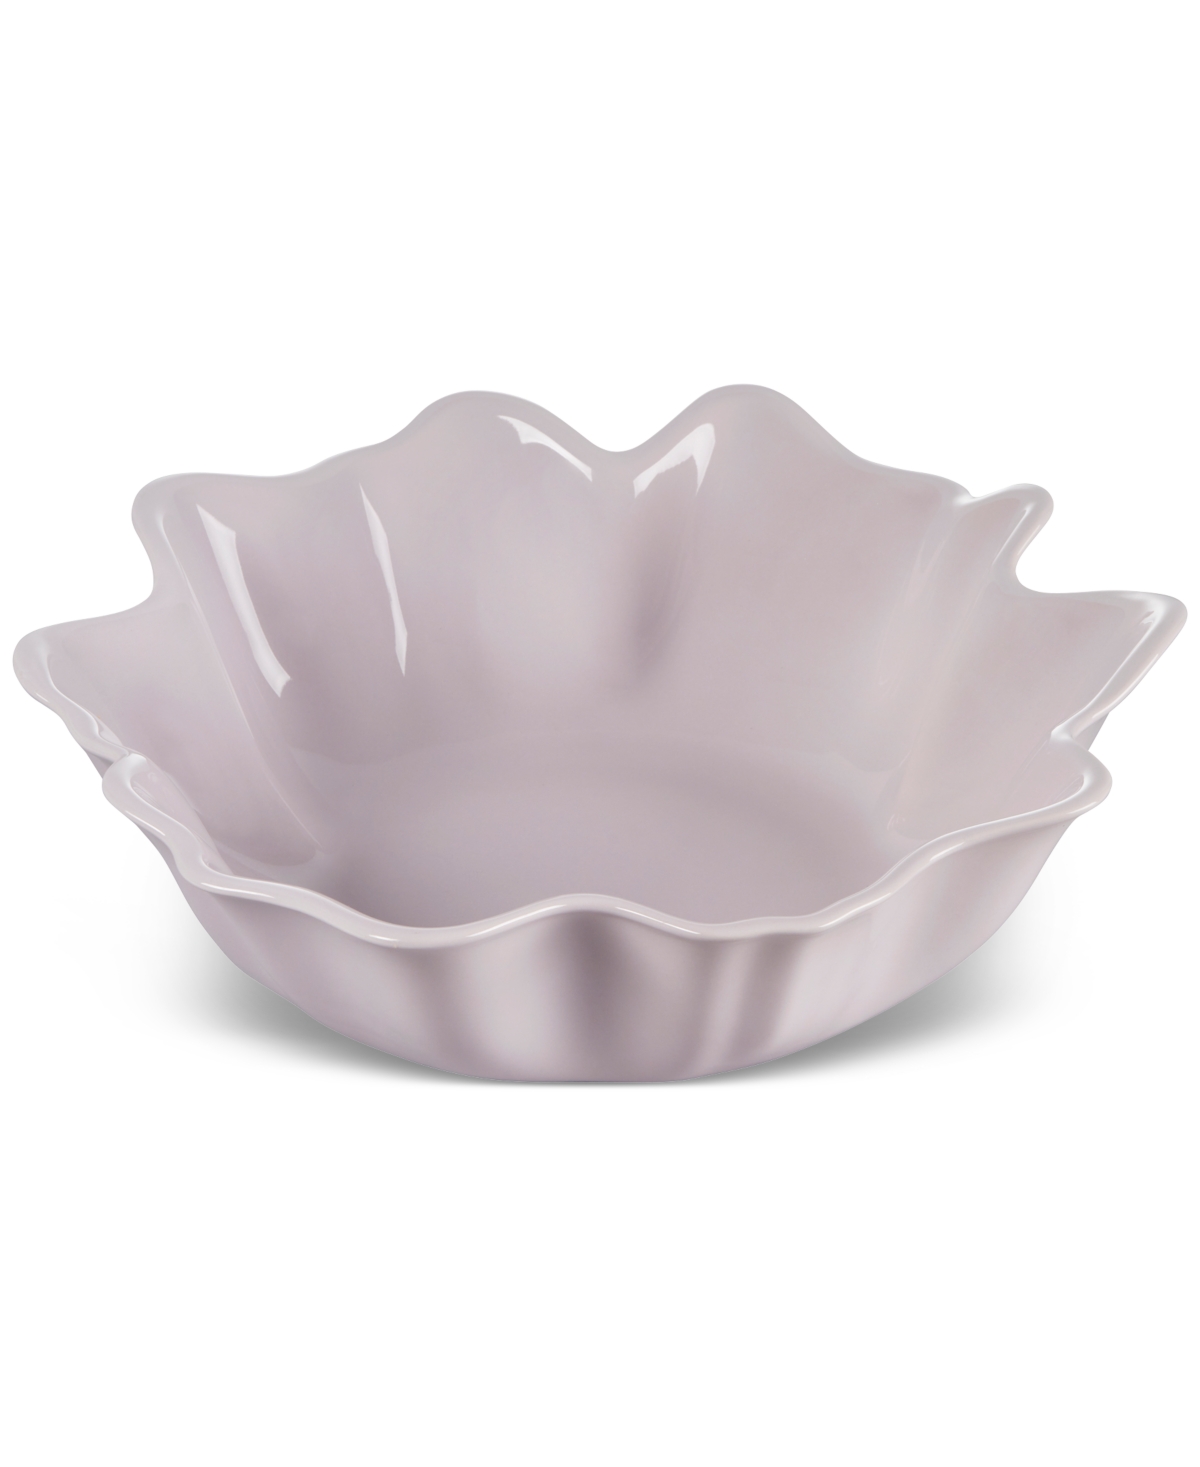 Iris Collection Stoneware Serving Bowl - Shell Pink